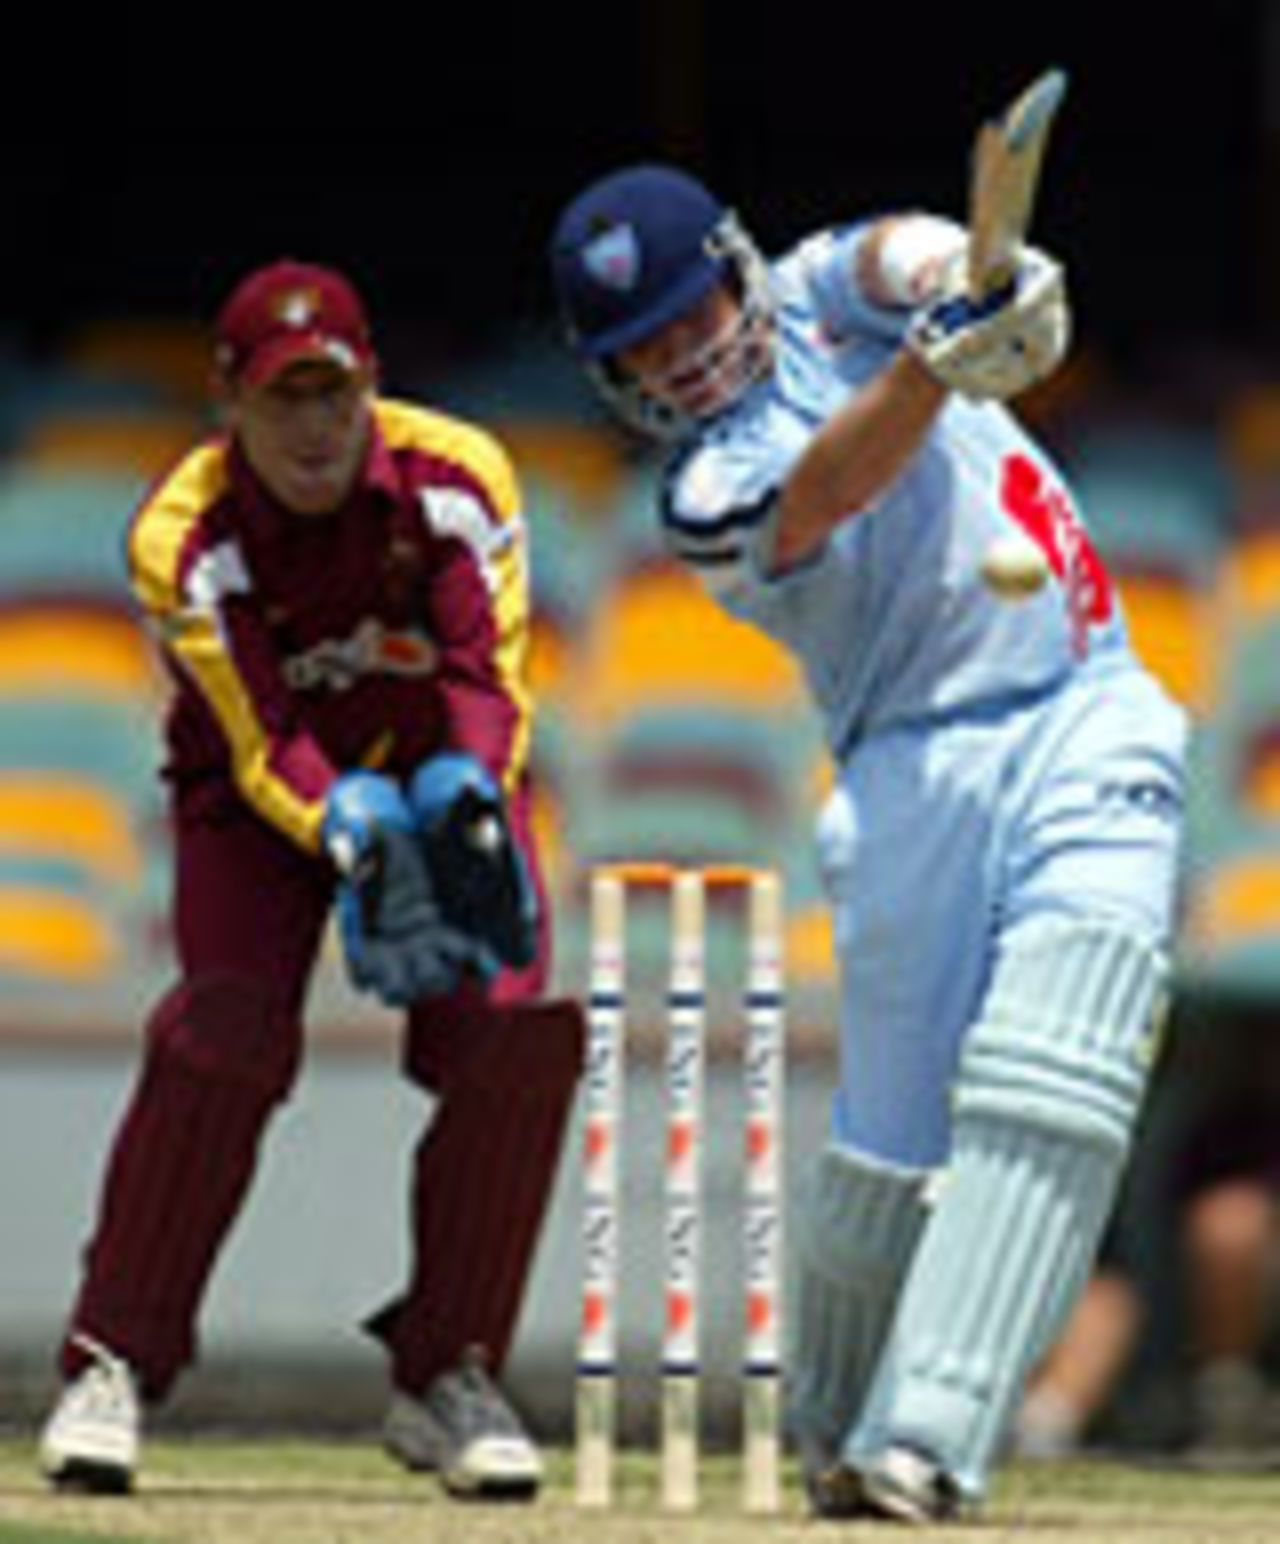 Brad Haddin attacks on his way to 88, Queensland v NSW, Brisbane, ING Cup, October 10, 2004